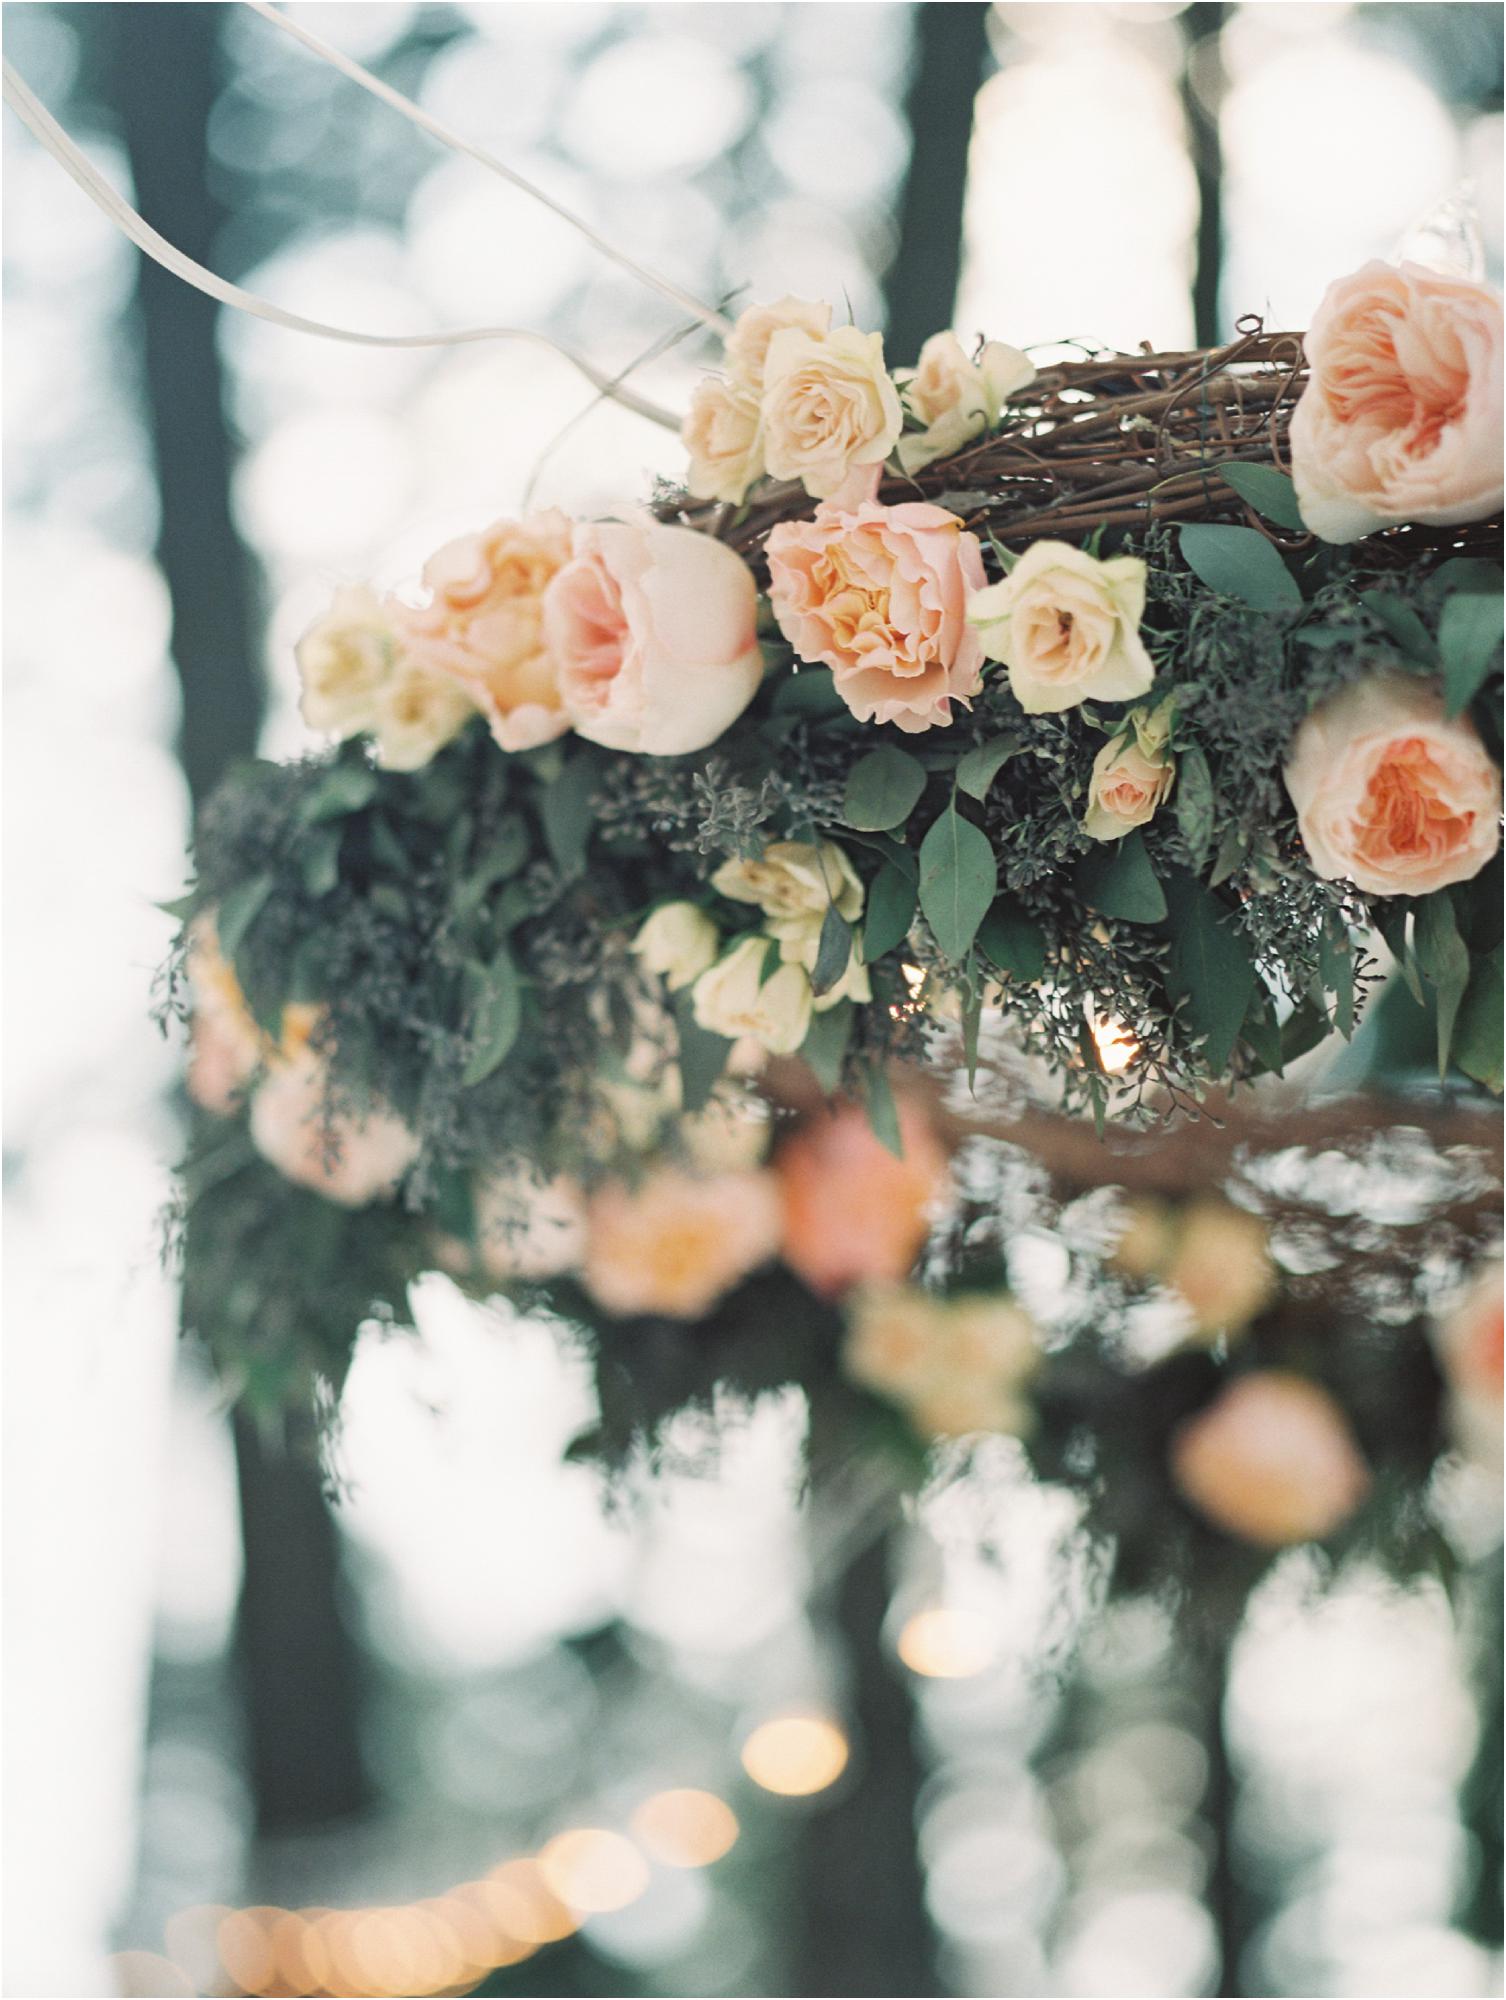  Montana Wedding at Glacier Mountain Lodge

Design and Florals: Goldfinch Events http://www.goldfinchevents.com

�Jeremiah & Rachel Photography 